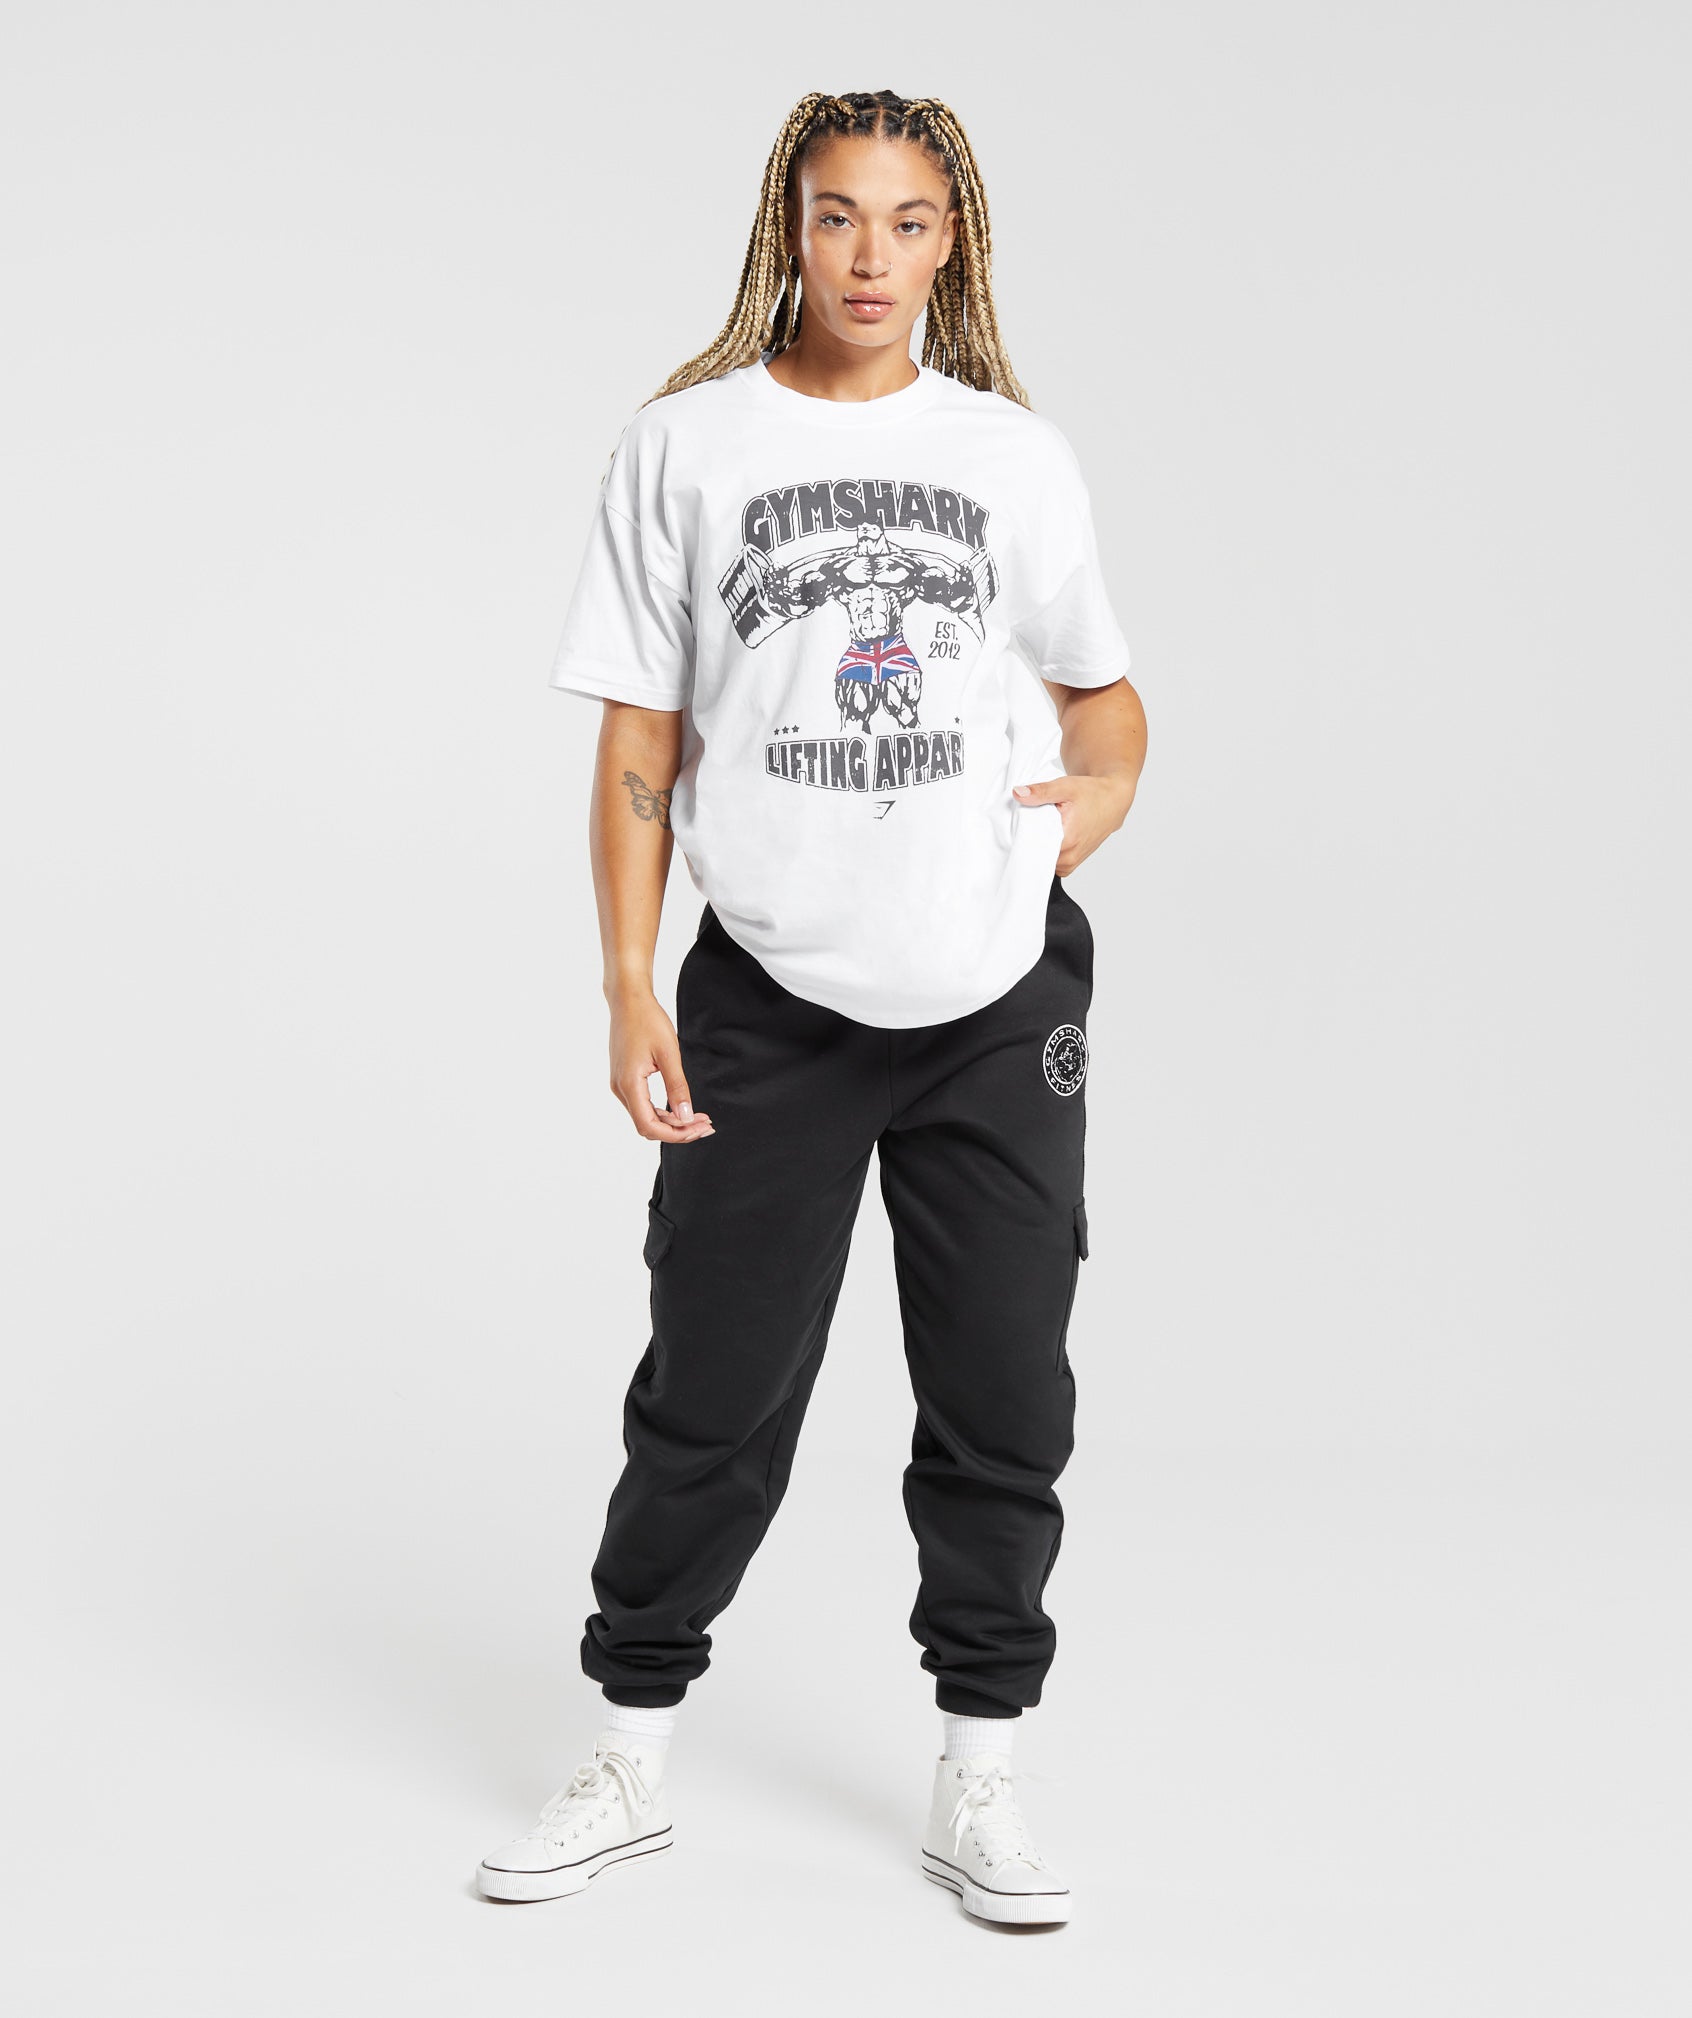 Lifting Apparel Oversized T-Shirt in White - view 4